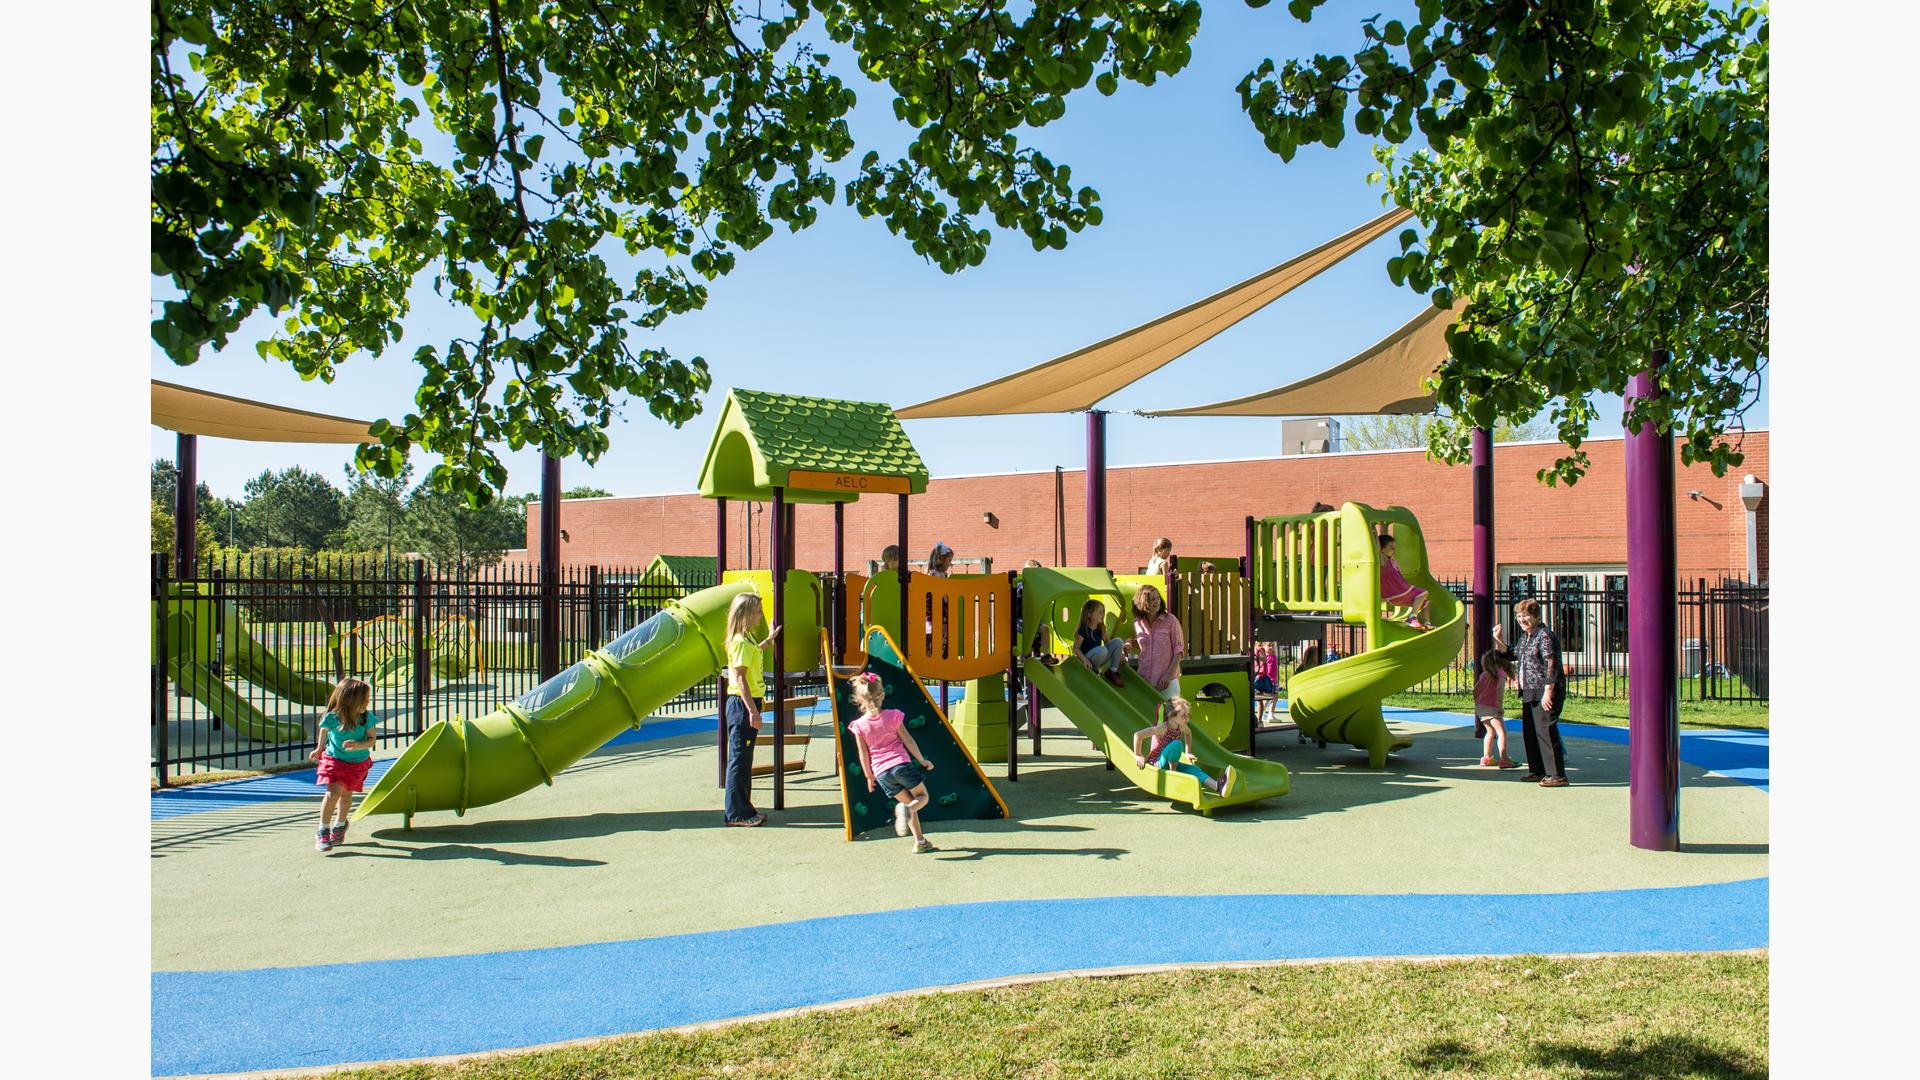 Adults watch as children play on a play structure with green slides, climbers, and bridges surrounded by a black iron fence next to a brick building.